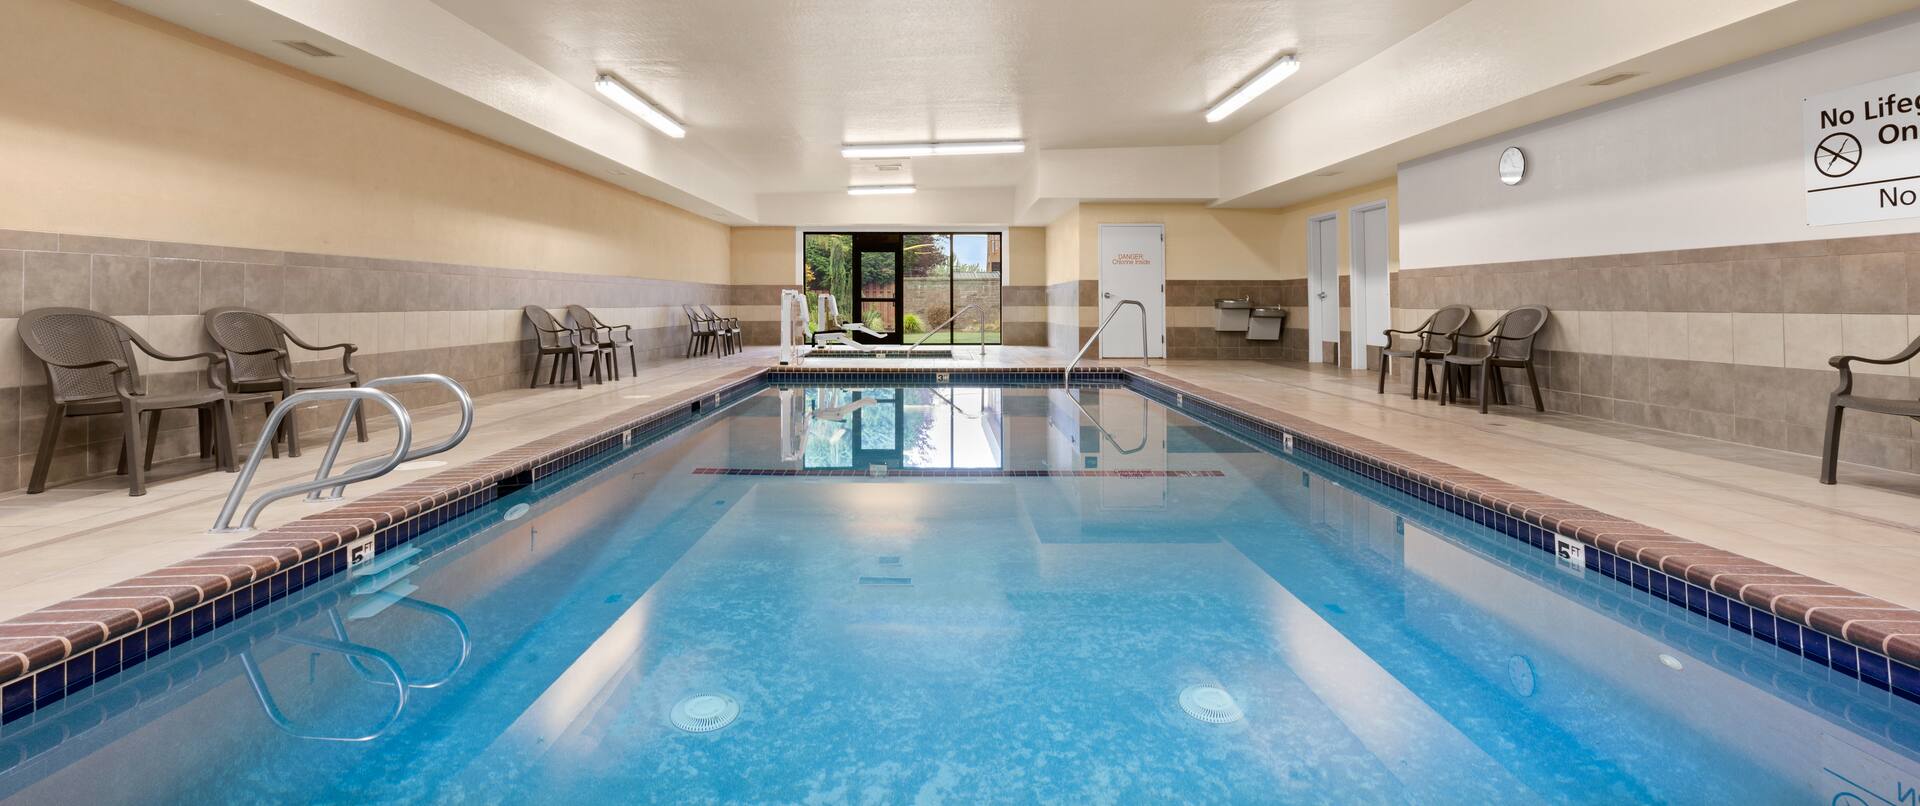 Indoor pool for use year round